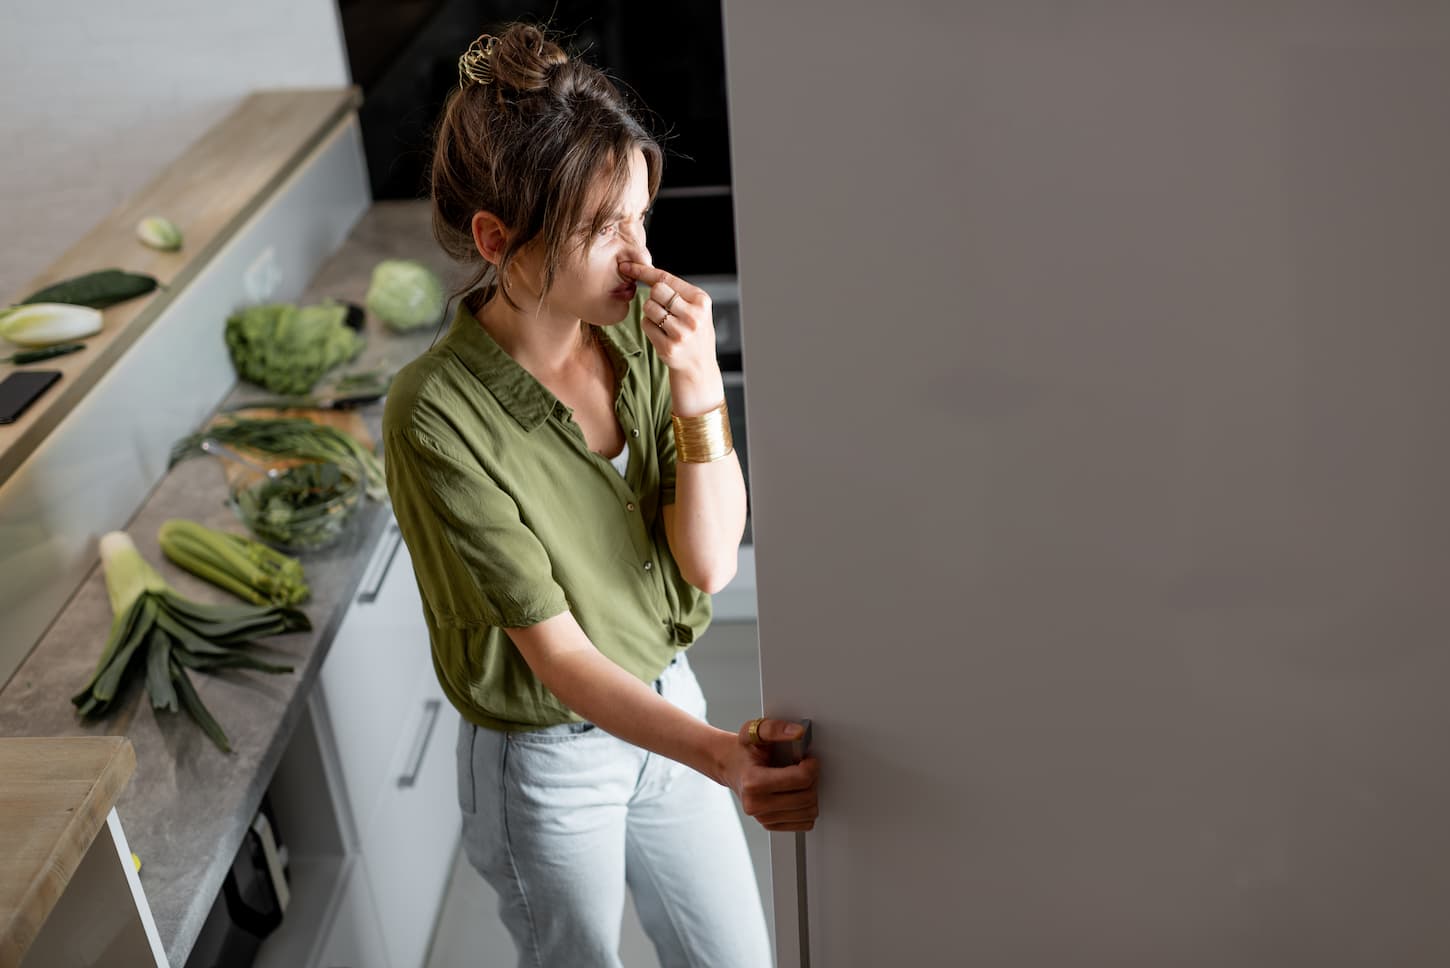 An image of a Woman looking into the fridge in the kitchen at home.